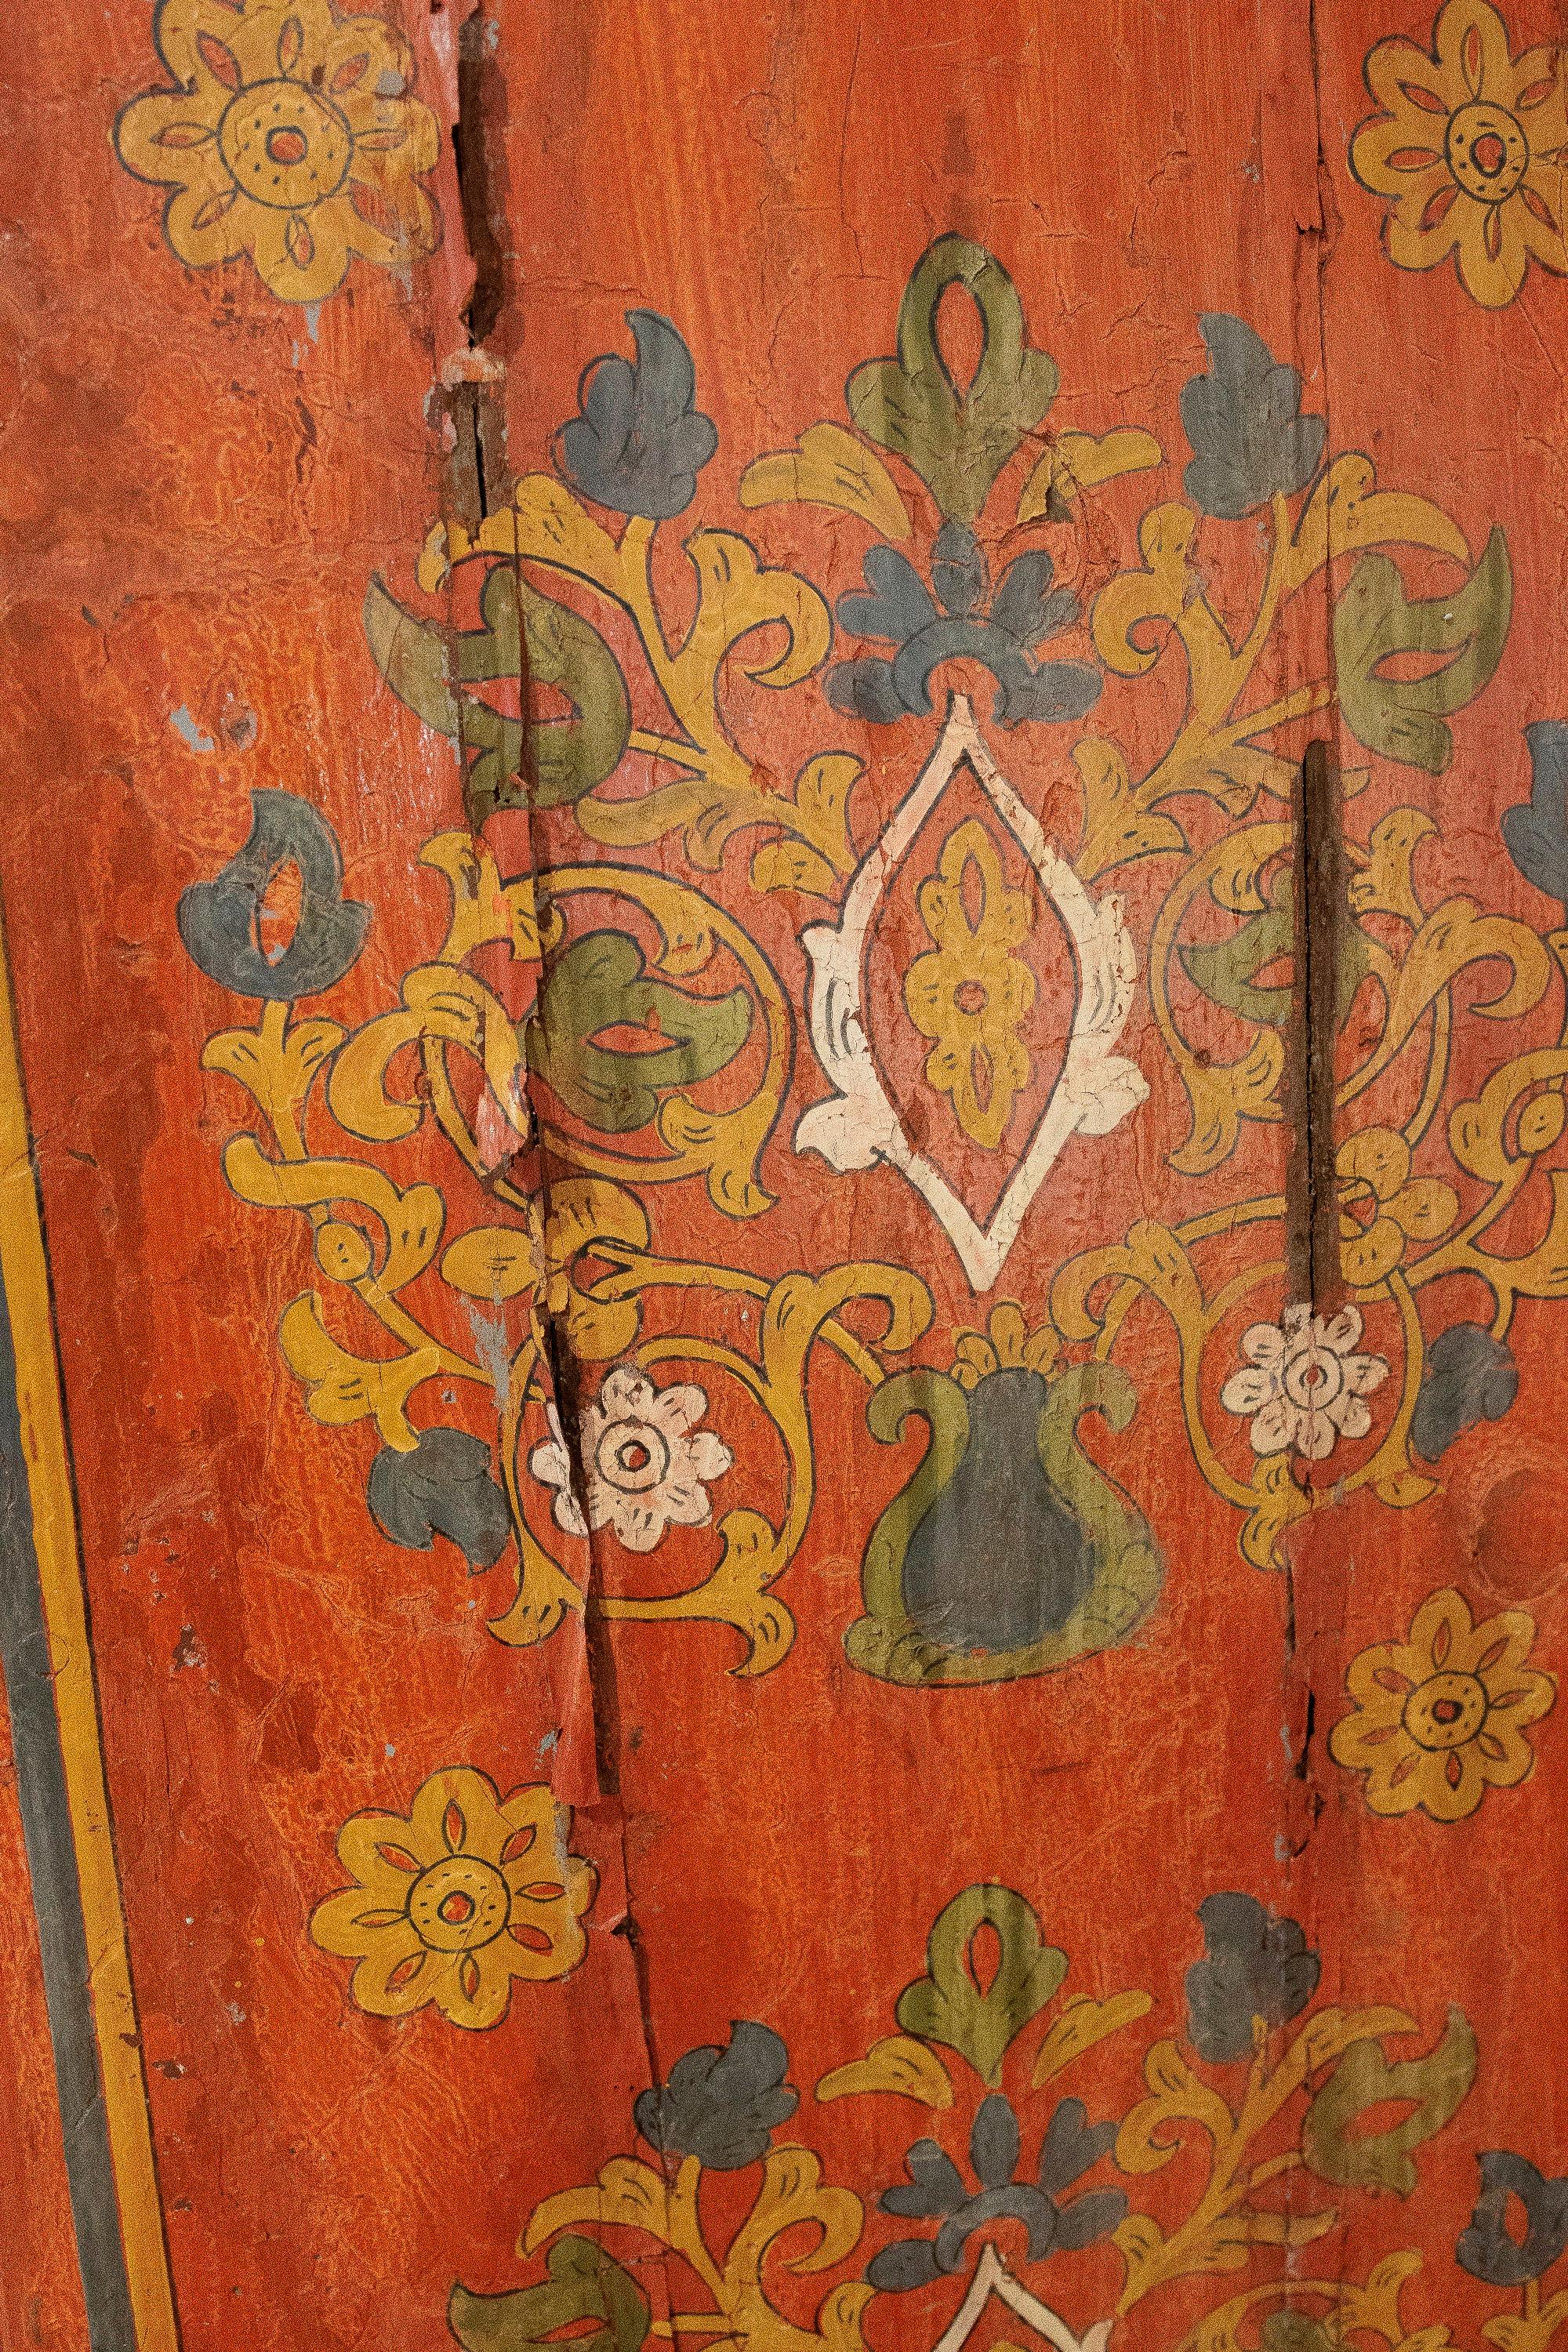 Moroccan Hand-Painted Wooden Door with Flower and Geometric Decoration For Sale 3